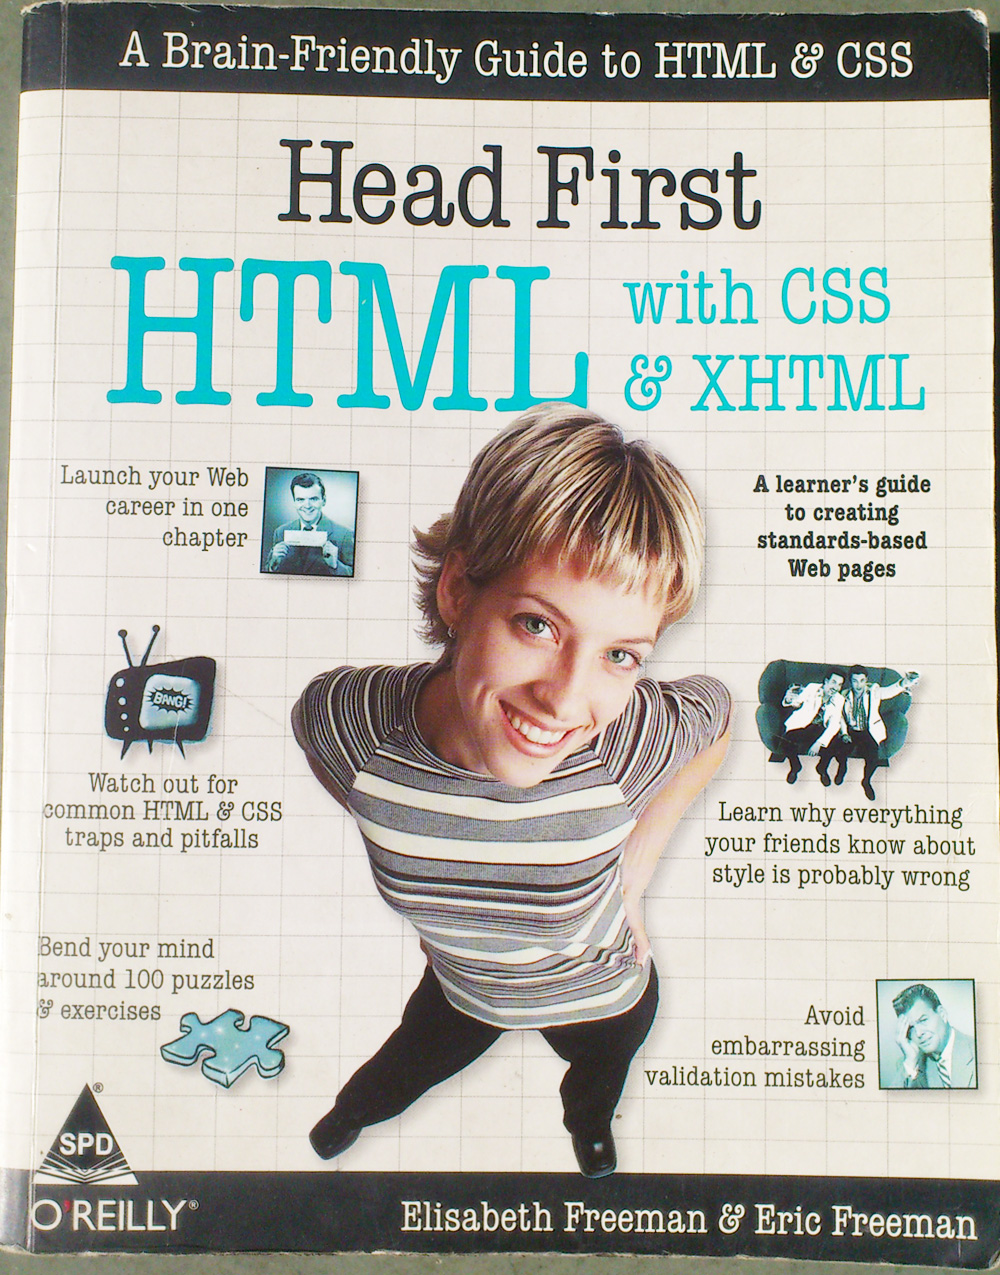 Head First HTML with CSS & XHTML by Elisabeth Freeman and Eric Freeman cover